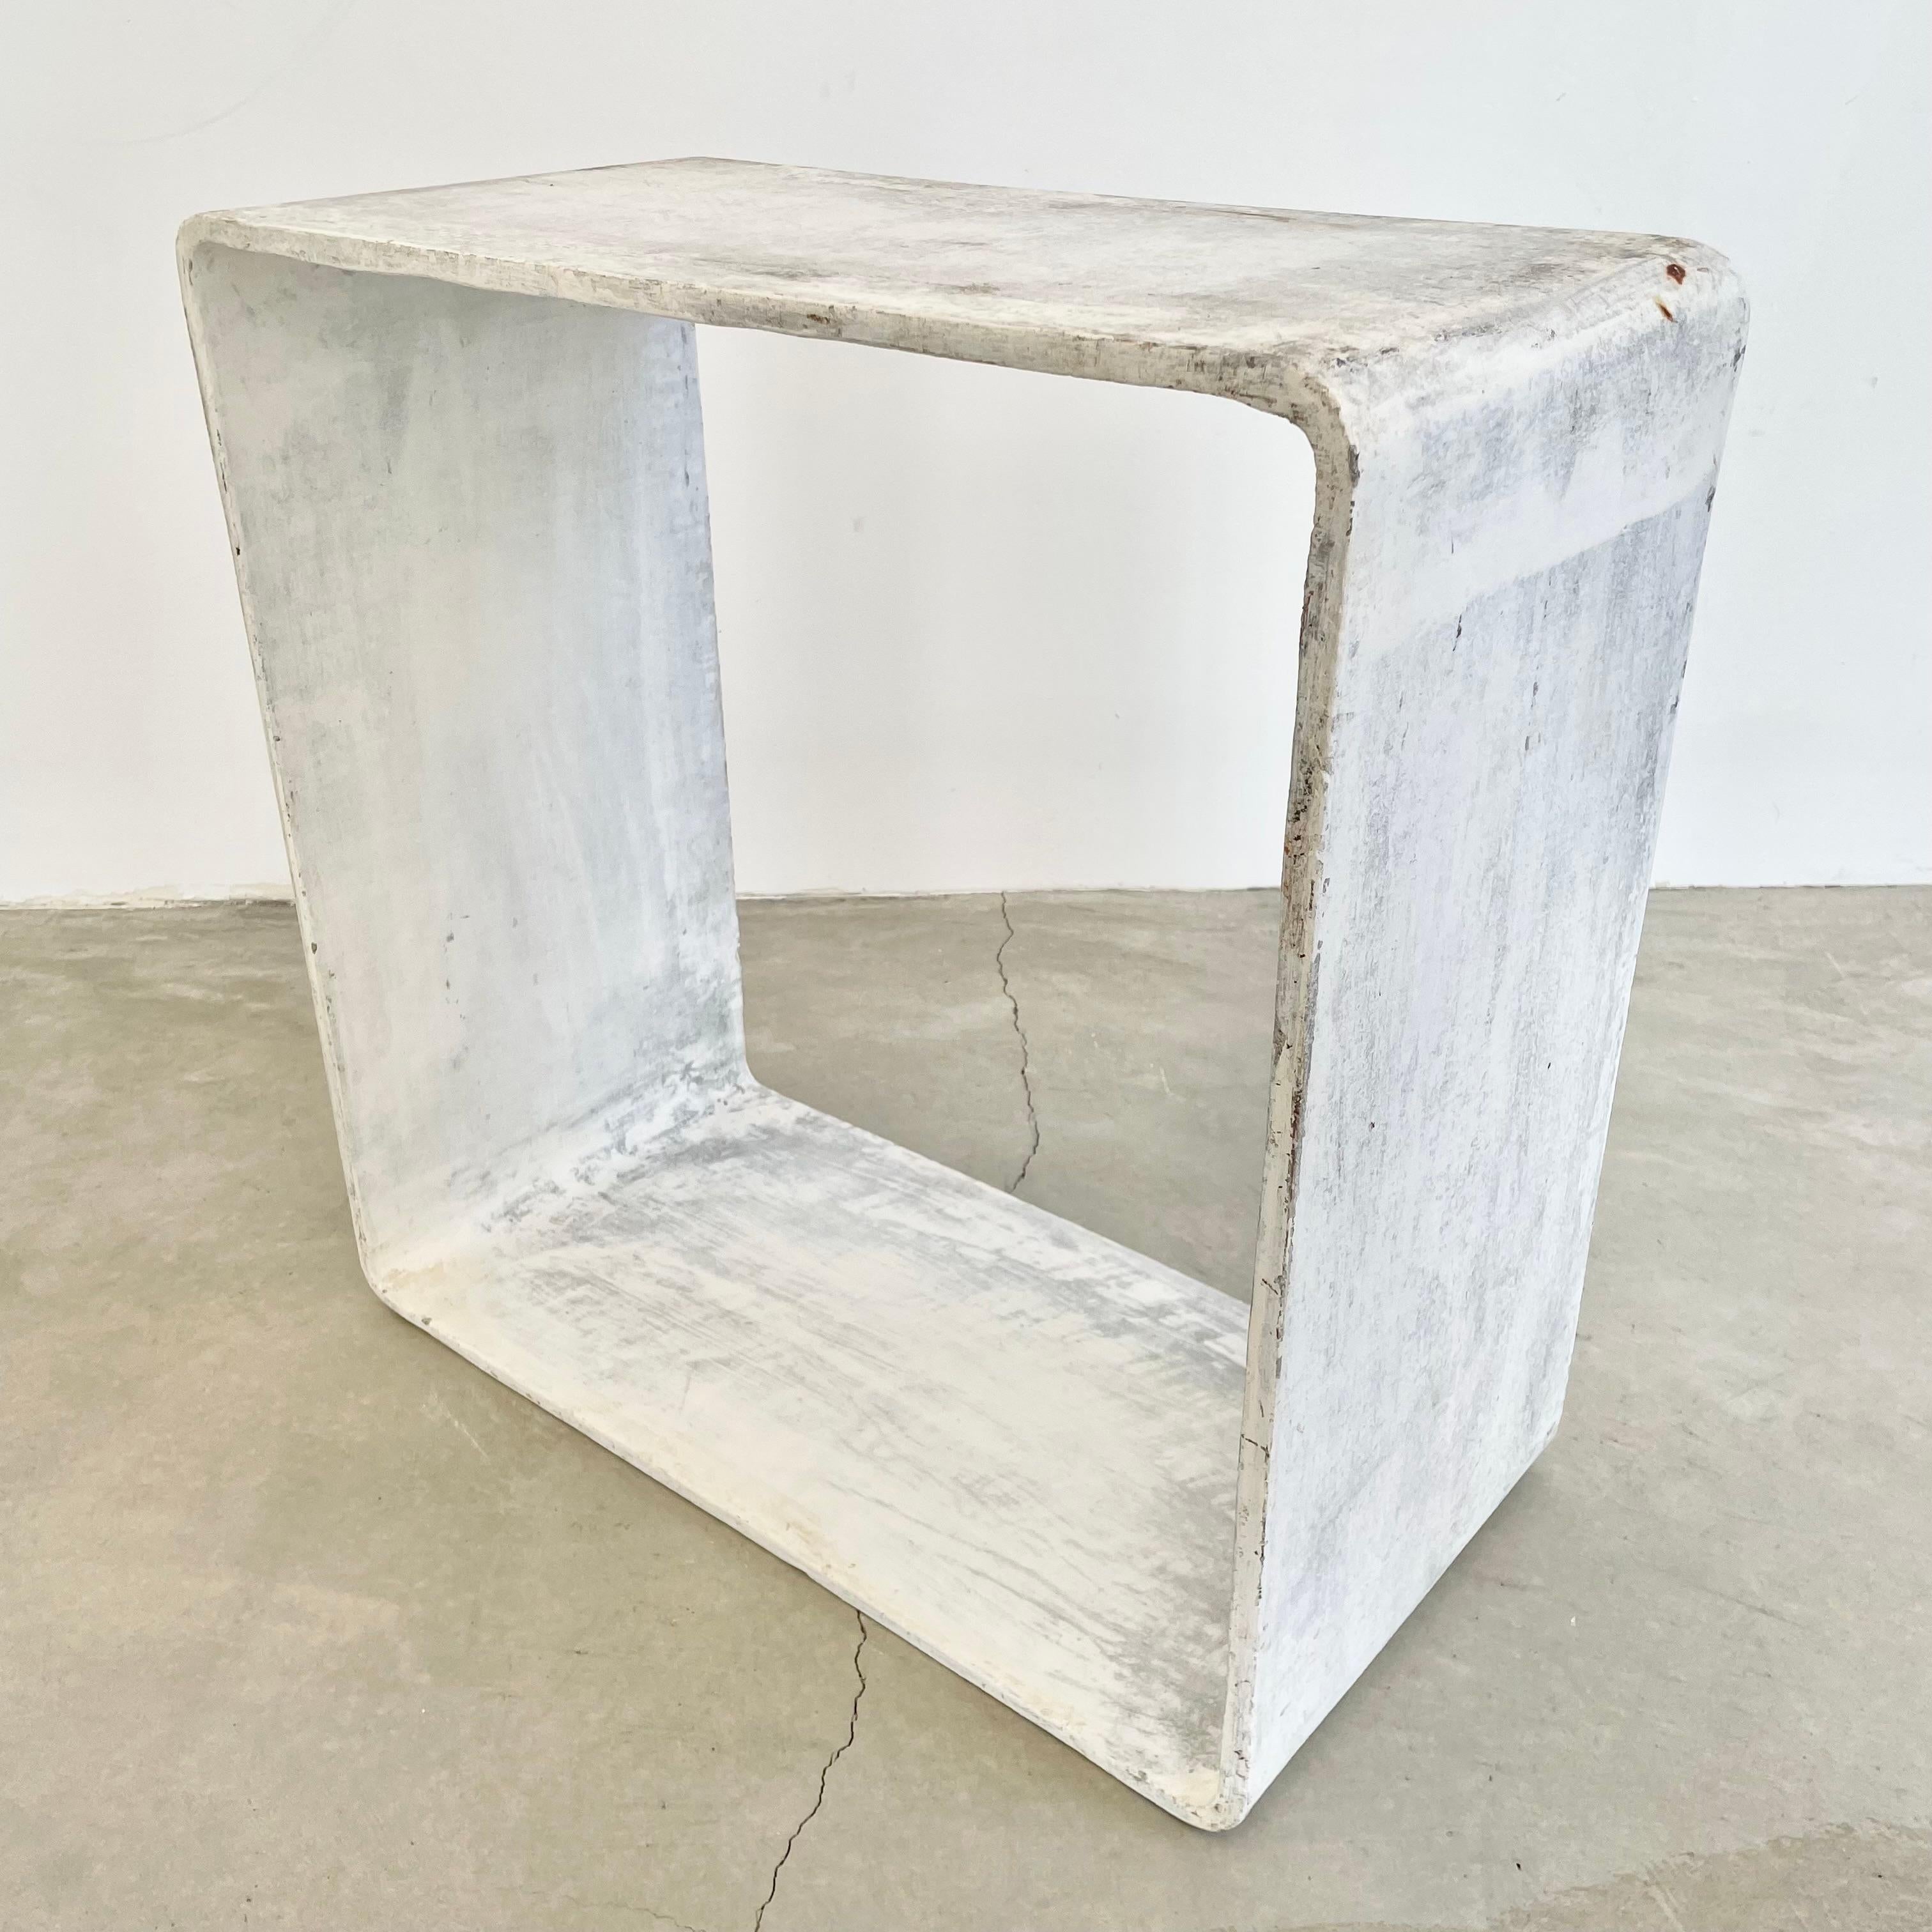 Willy Guhl Concrete Cube Side Table, 1960s Switzerland For Sale 6